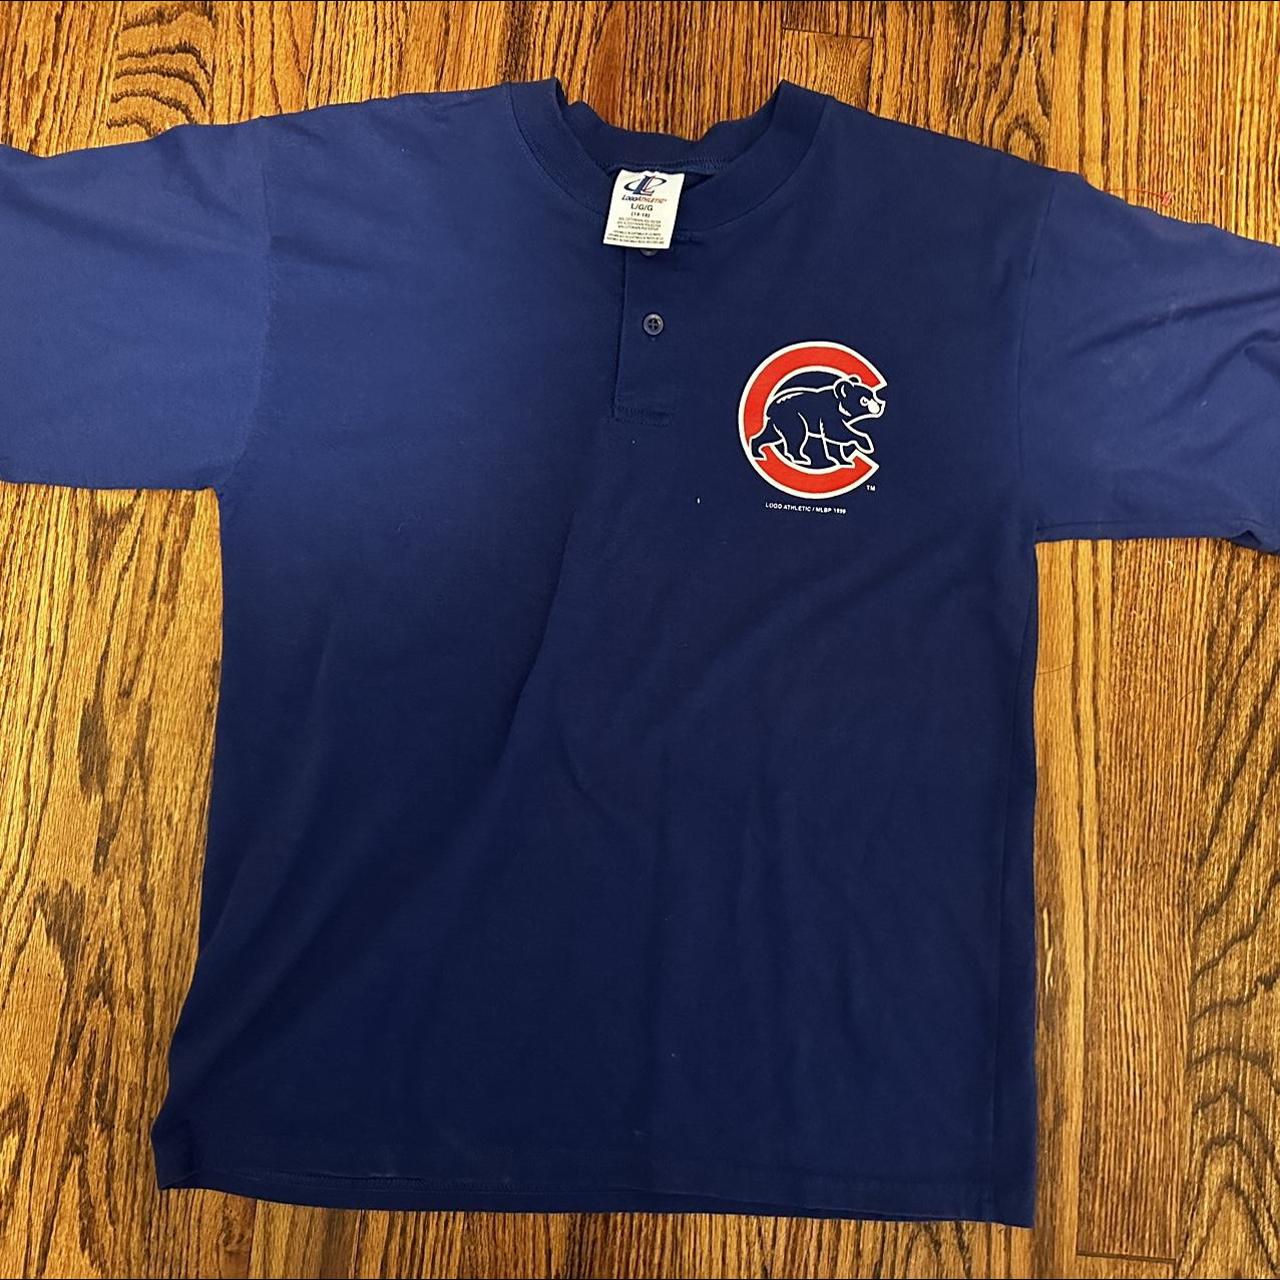 Chicago Cubs Baseball Vintage Sports Shirts for sale